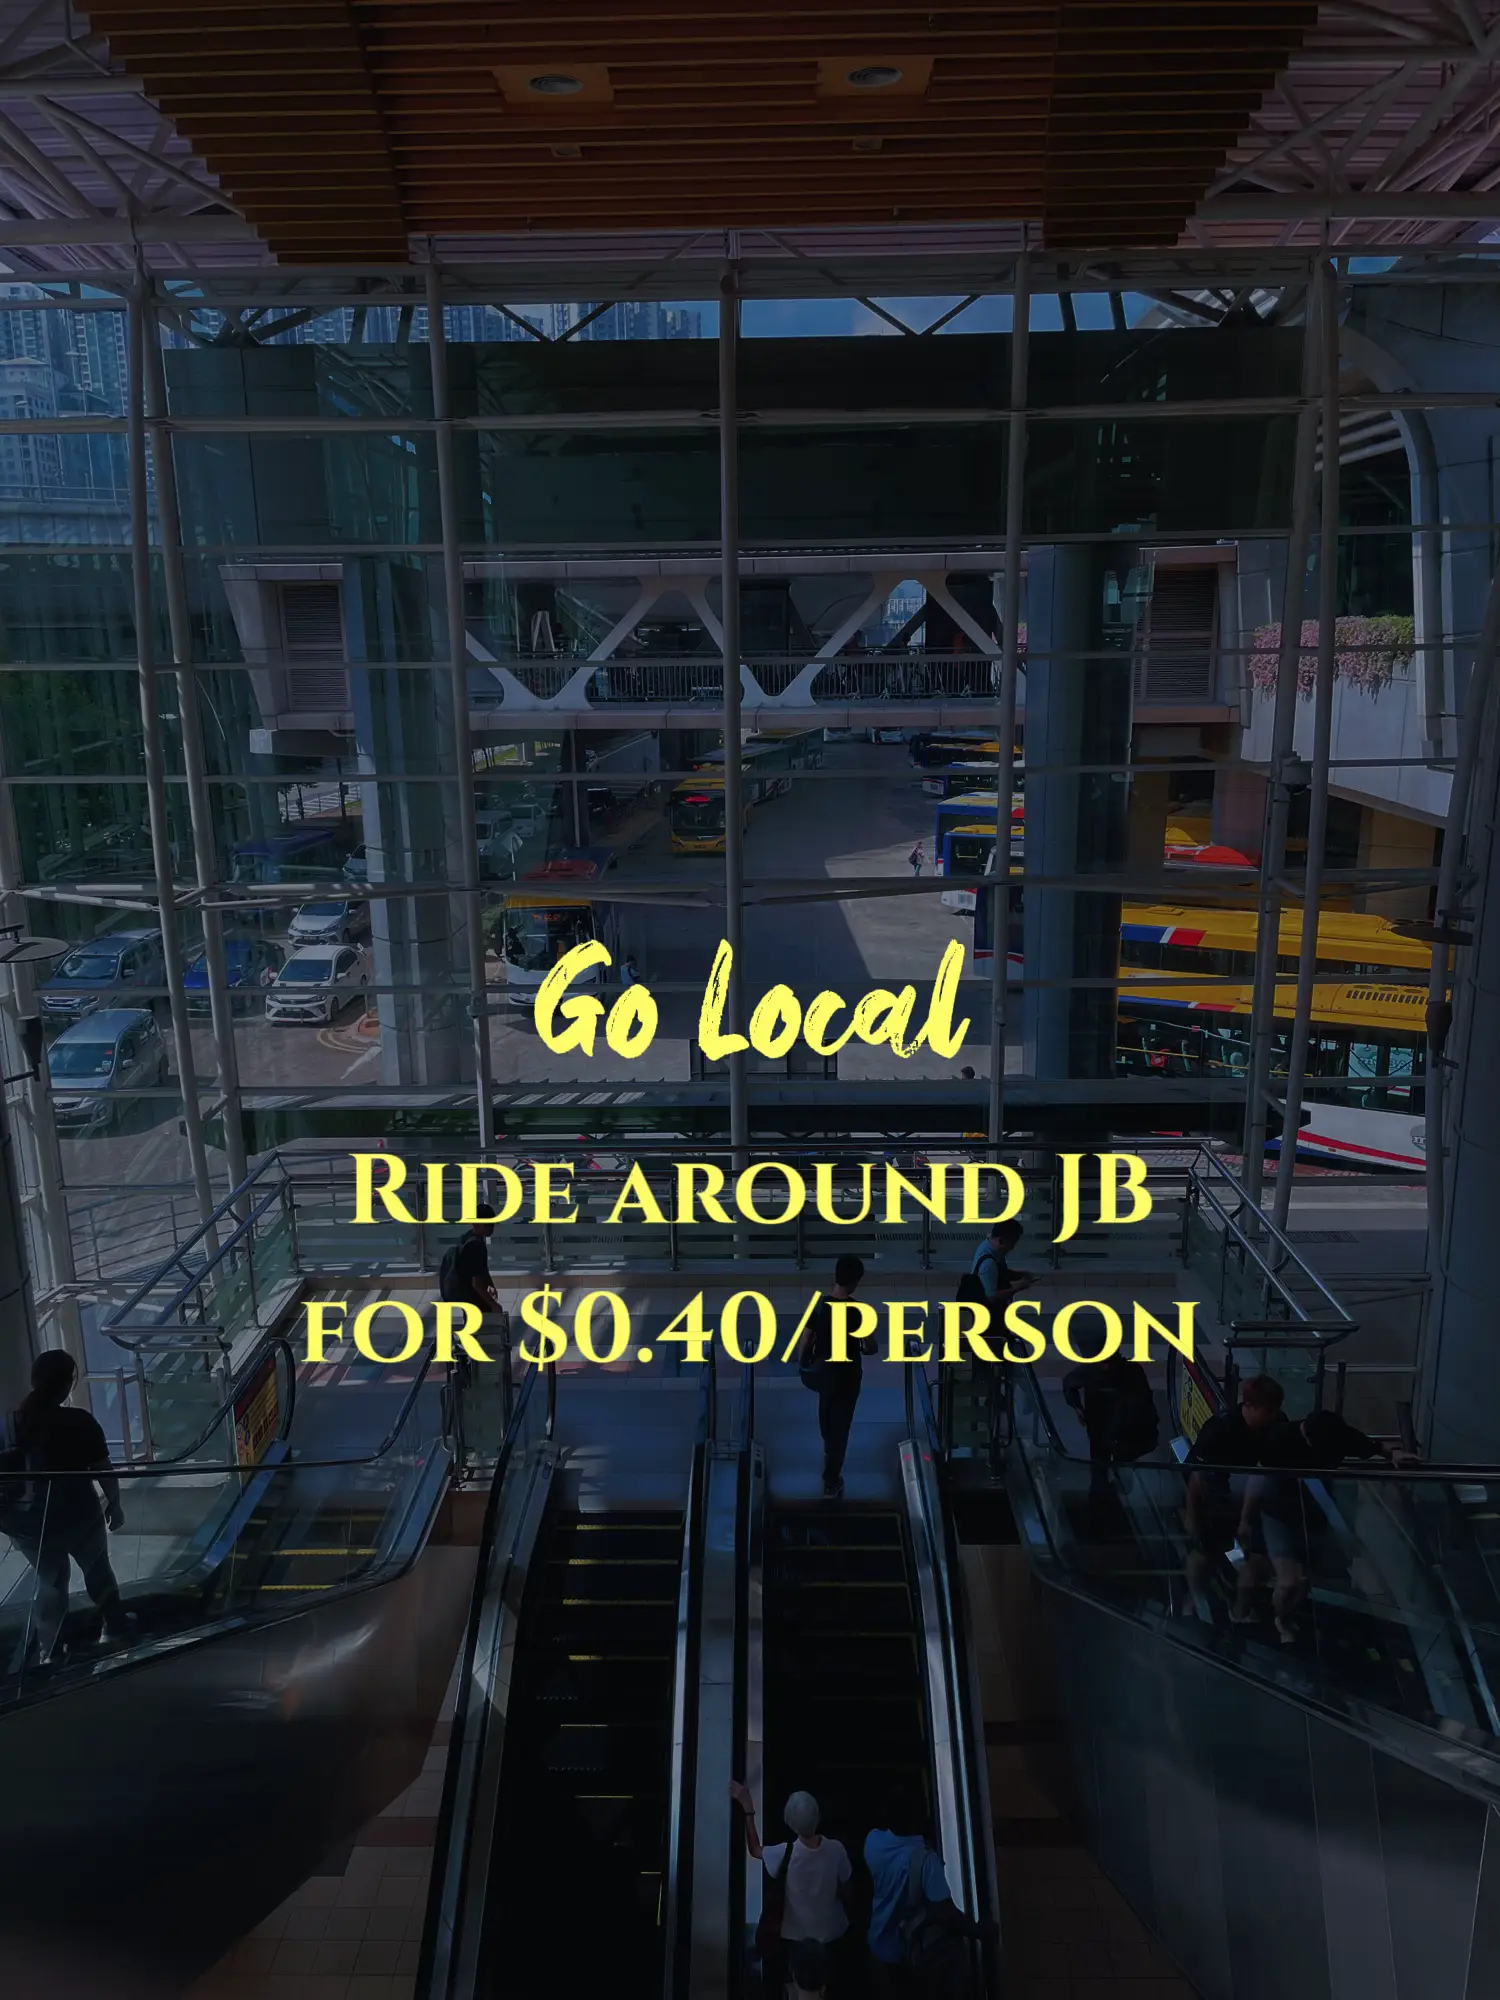 Ditch Grab, Go Local: Ride around JB for $0.40's images